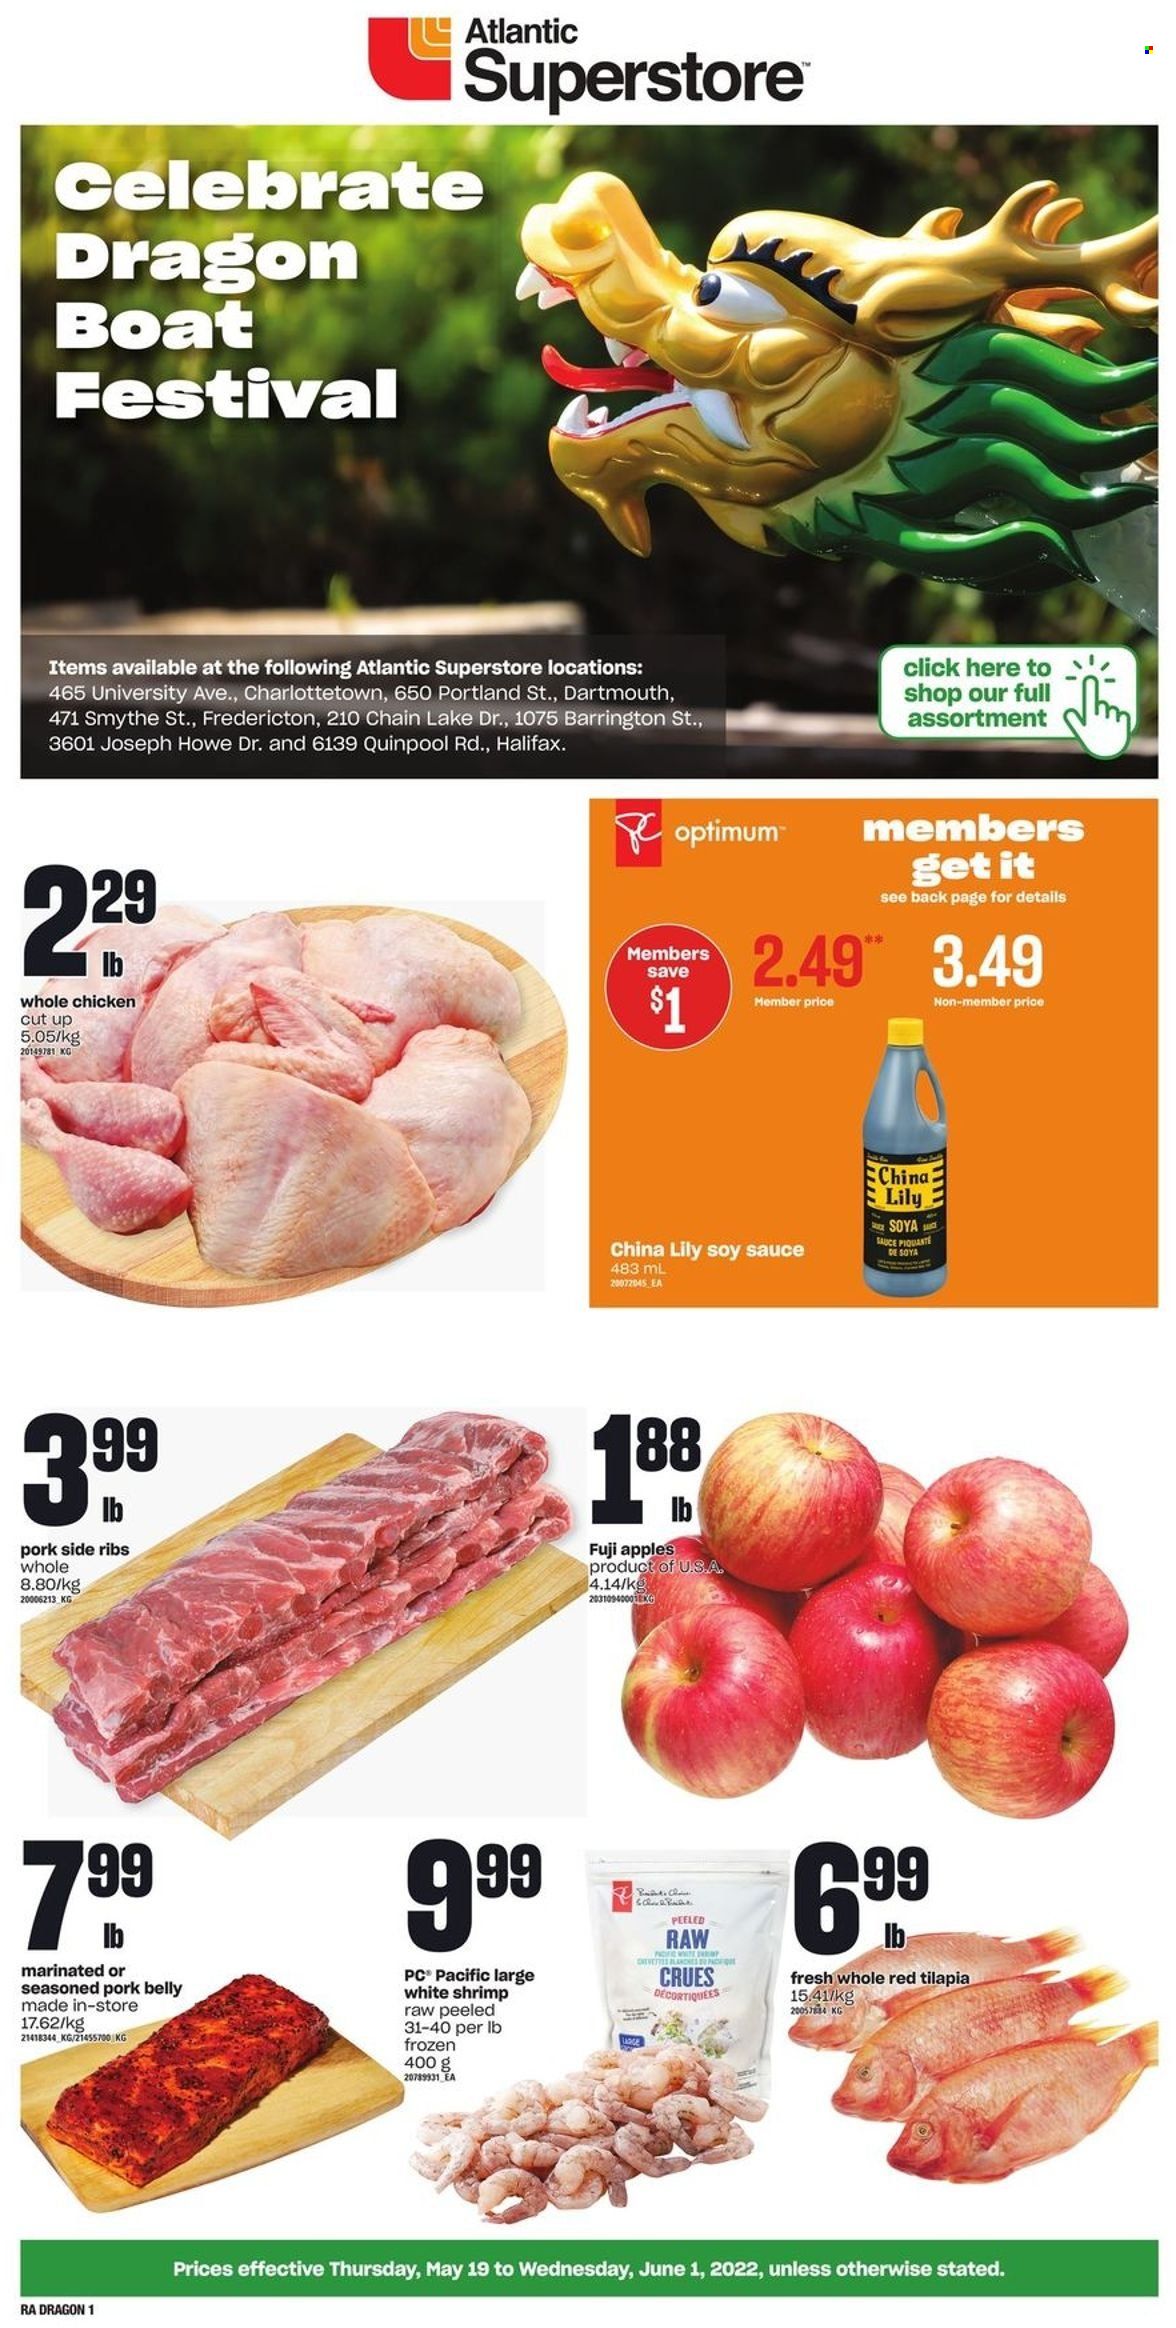 thumbnail - Atlantic Superstore Flyer - May 19, 2022 - June 01, 2022 - Sales products - apples, Fuji apple, tilapia, shrimps, sauce, soy sauce, whole chicken, chicken, pork belly, pork meat, Optimum. Page 1.